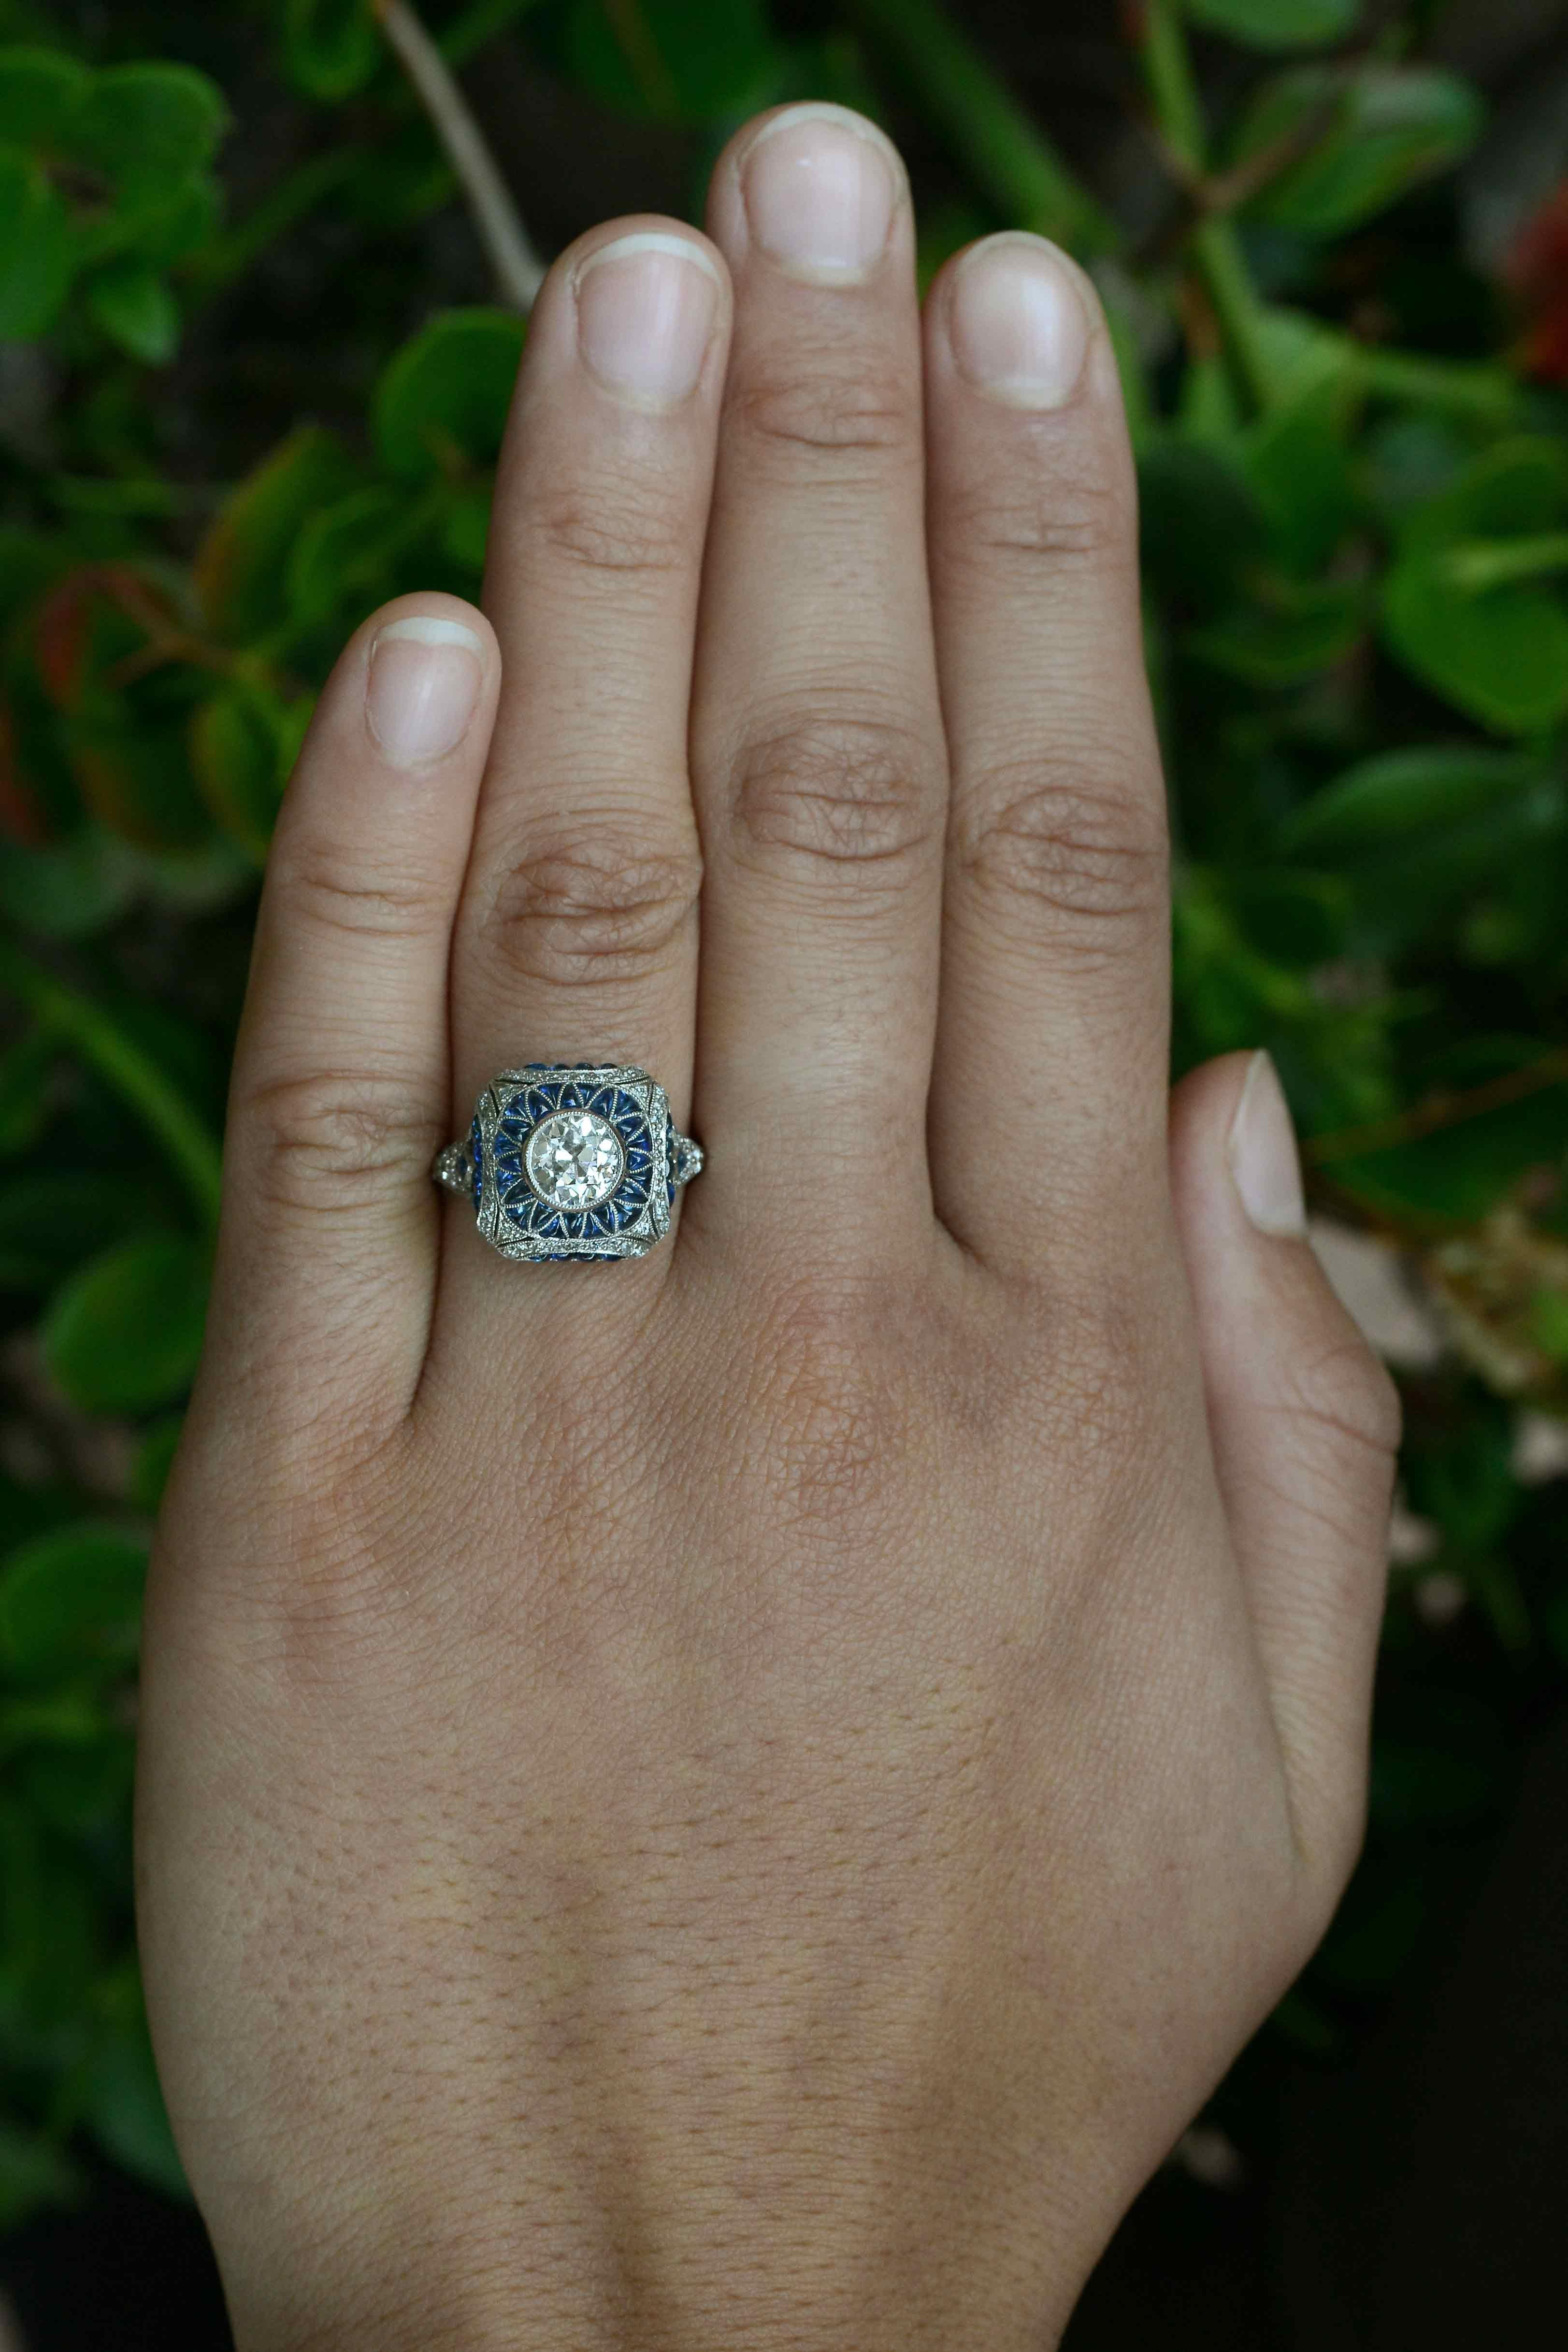 An antique old mine diamond engagement ring that's Art Deco inspired, with a micro mosaic sapphire dome that is most mesmerizing and so detailed. With large, chunky facets, this over 1 carat, 120 year old hand cut diamond displays a captivating,